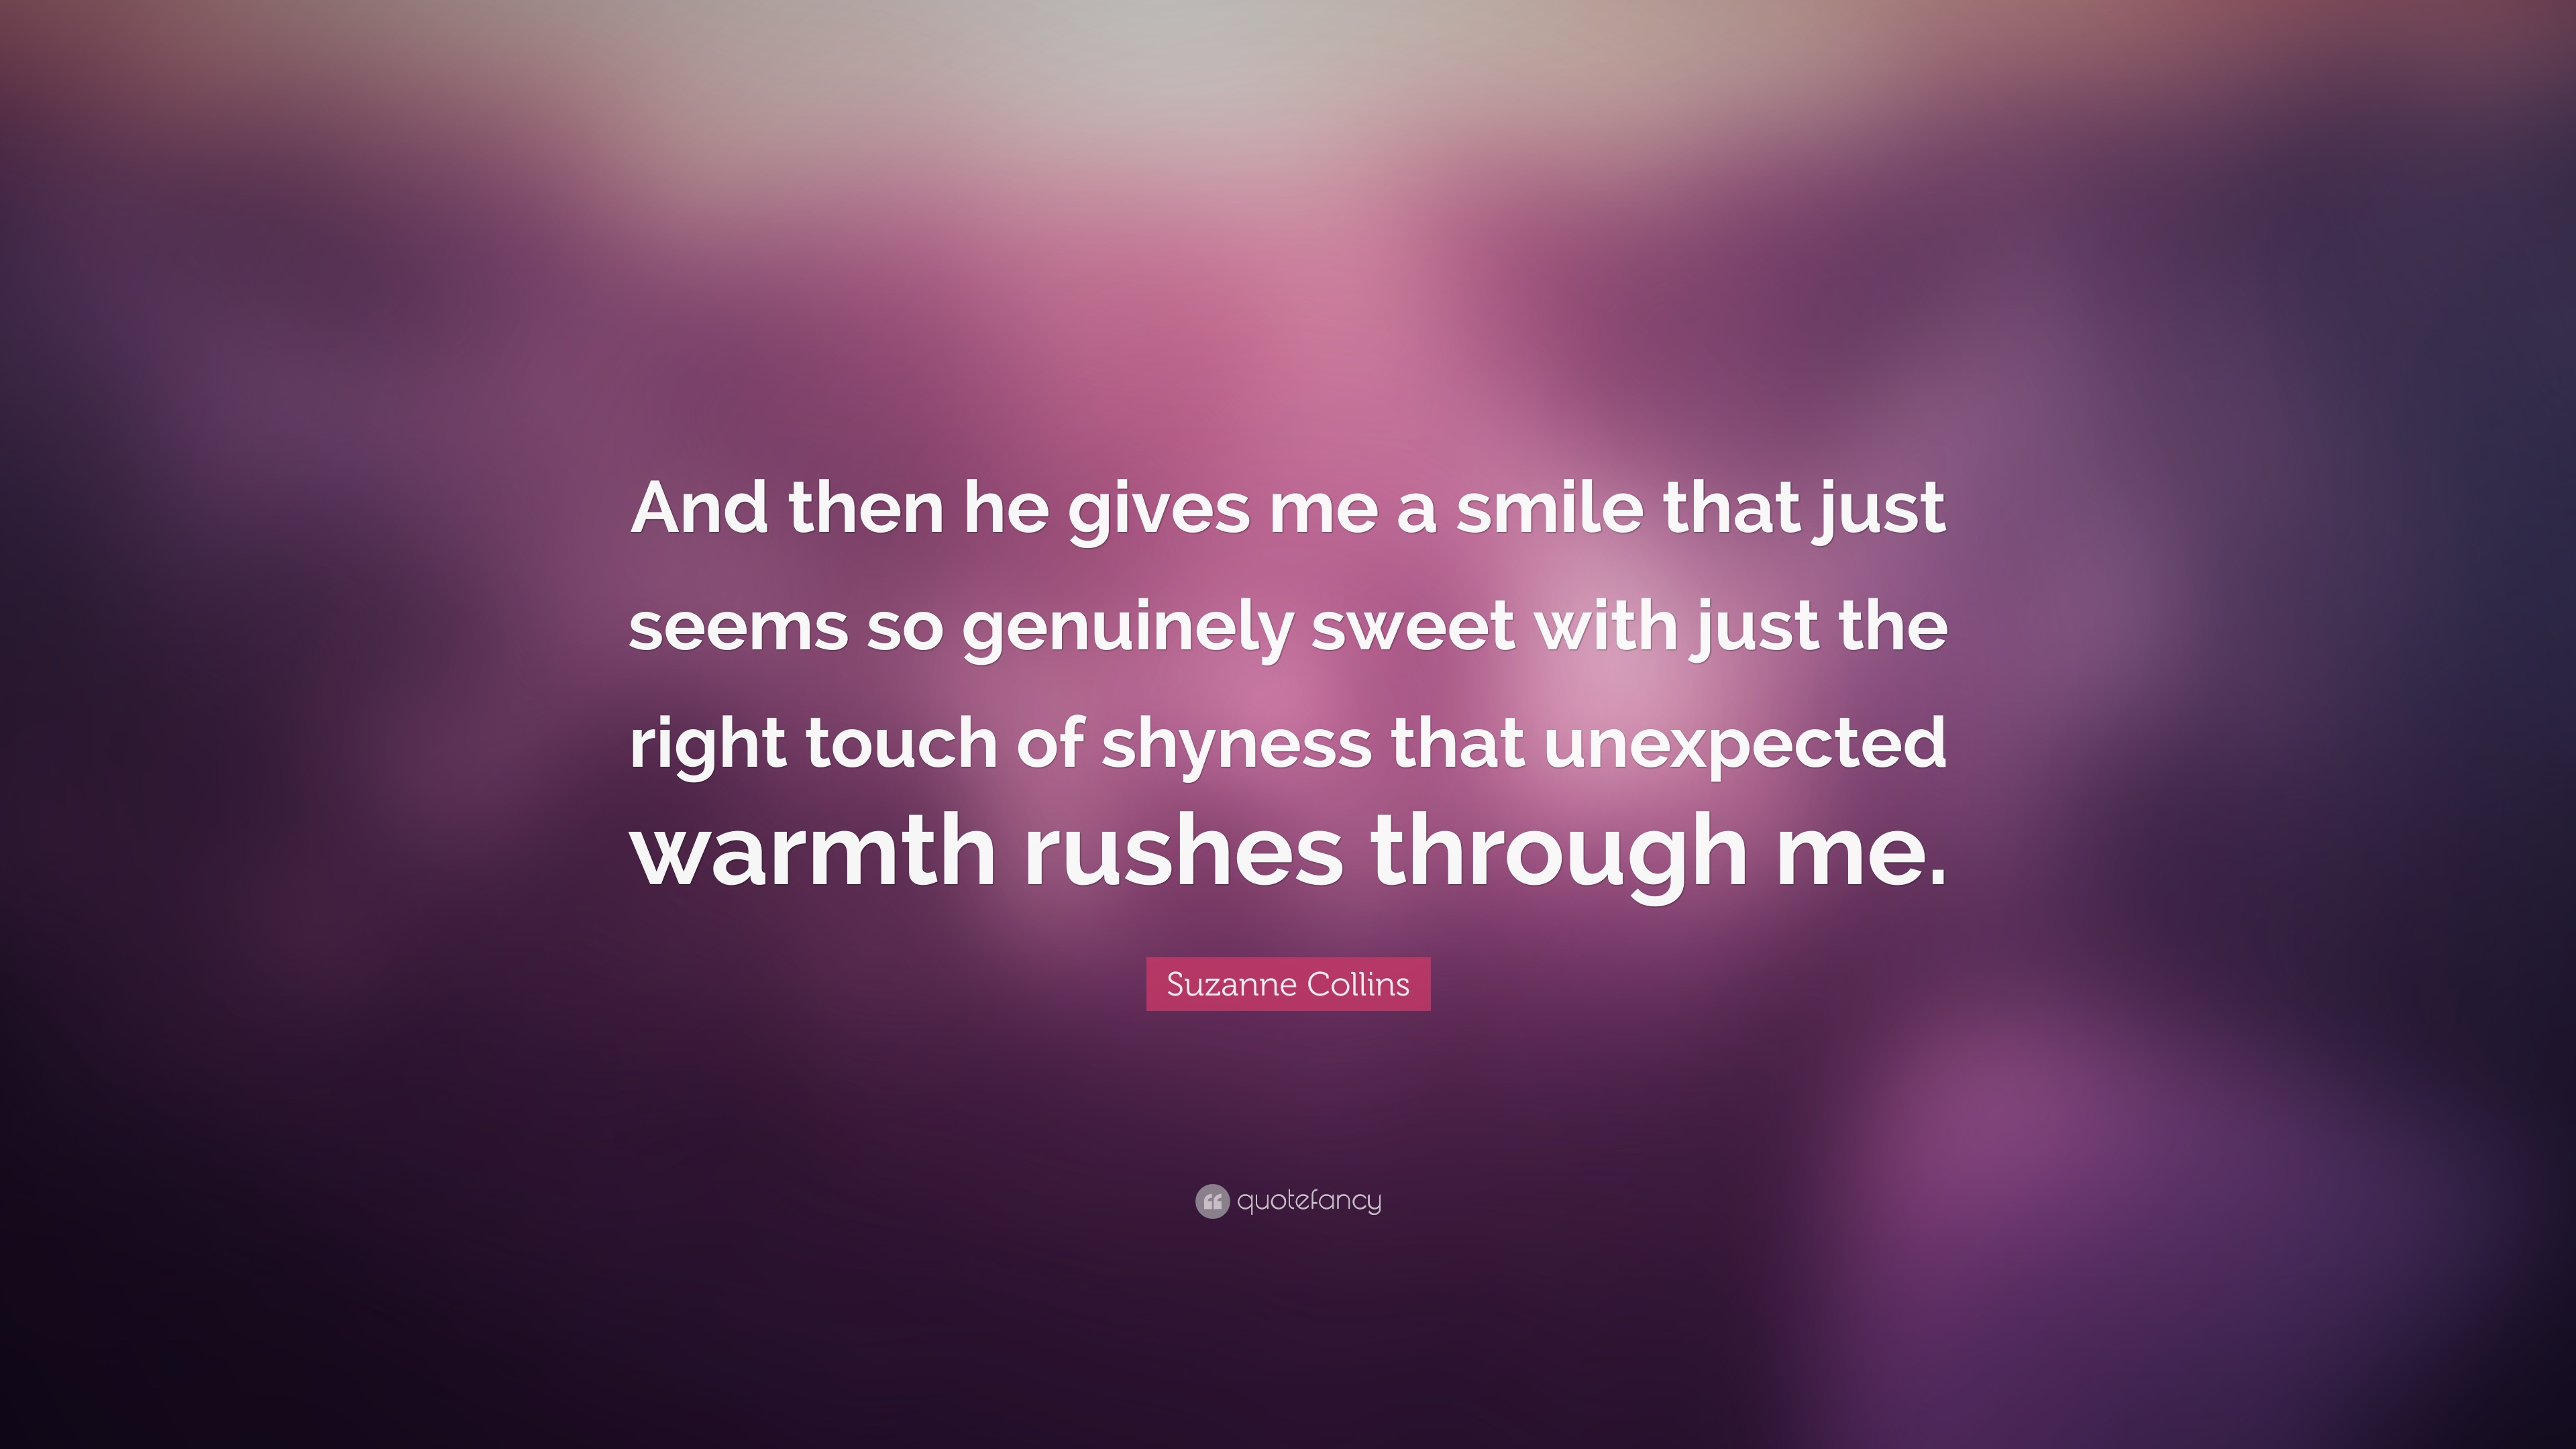 Suzanne Collins Quote: “And then he gives me a smile that just seems ...